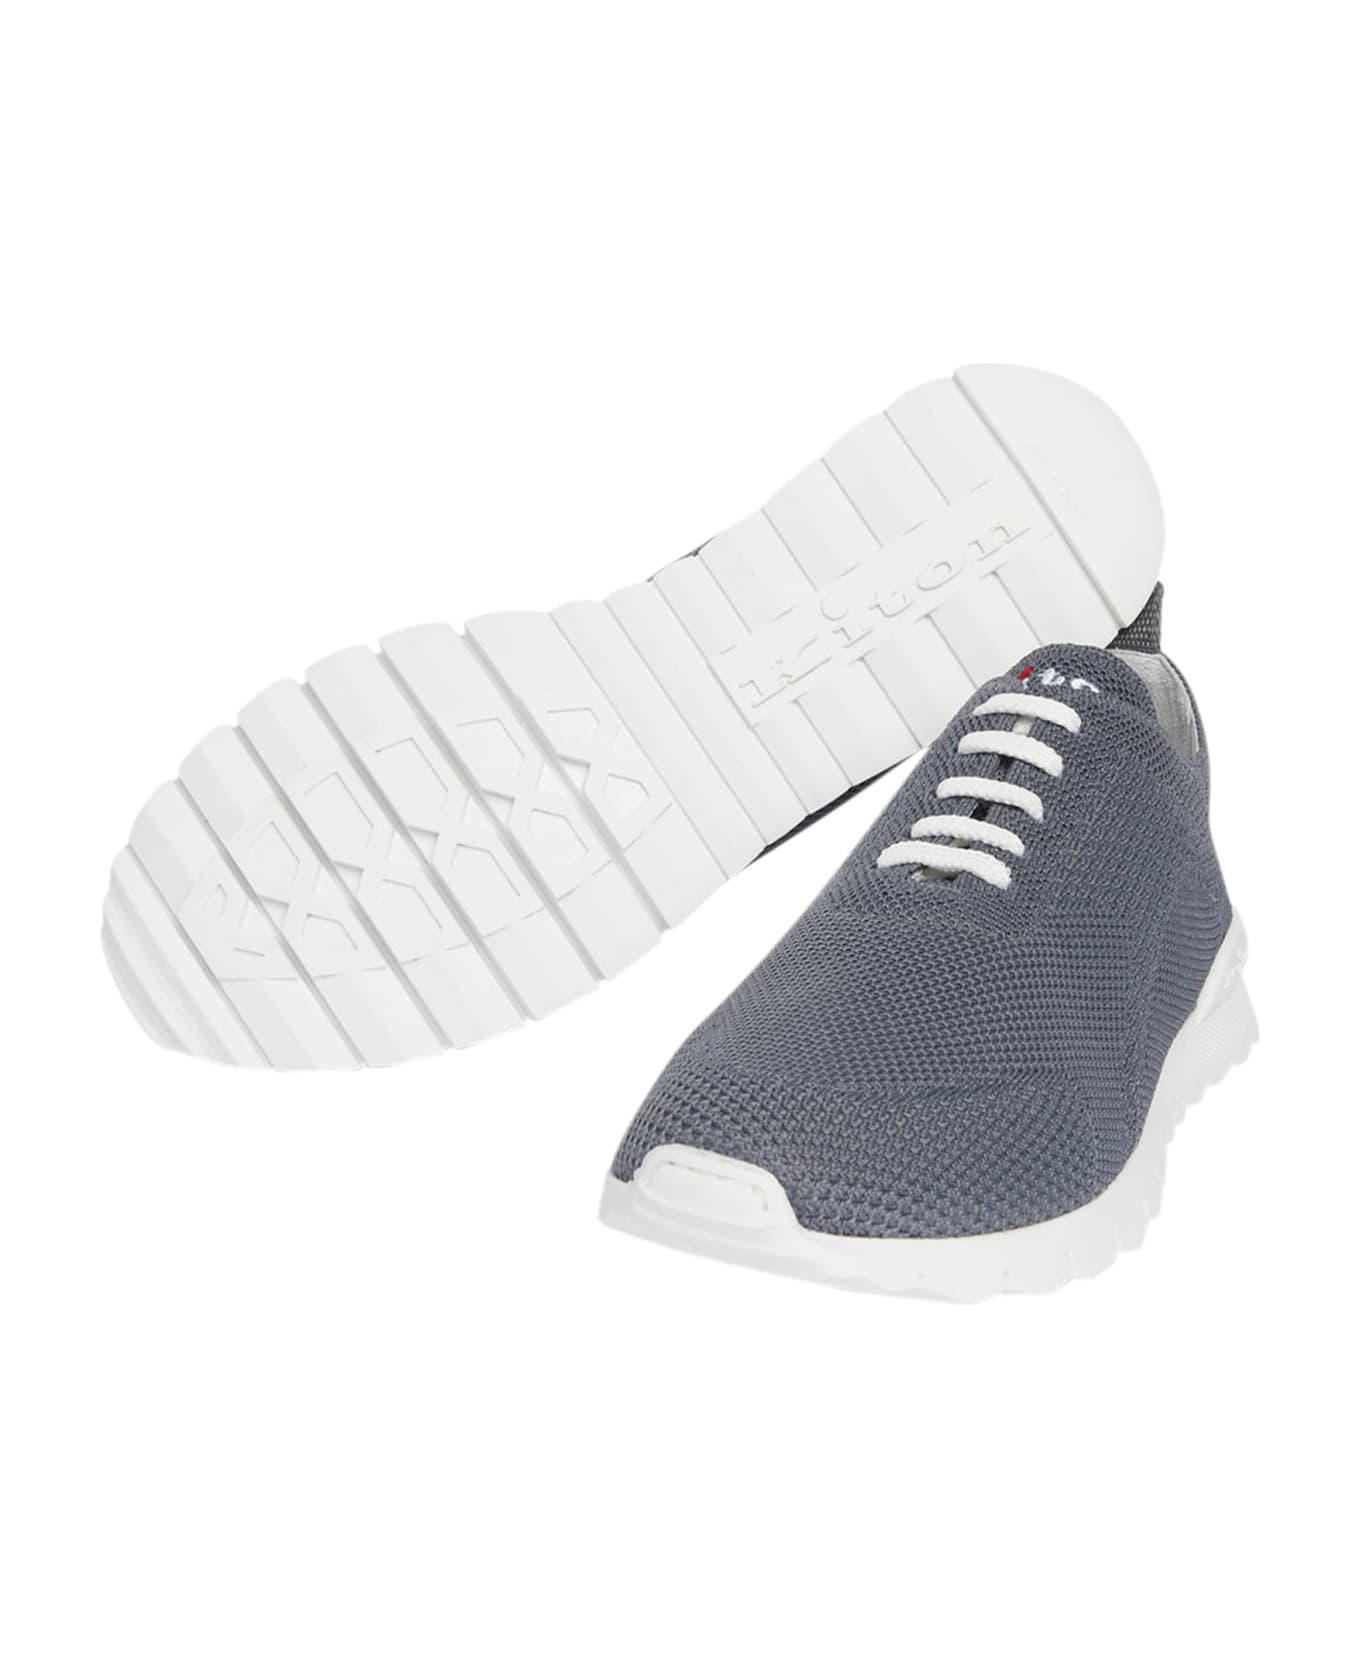 Kiton Fits - Sneakers Shoes Cotton - GREY